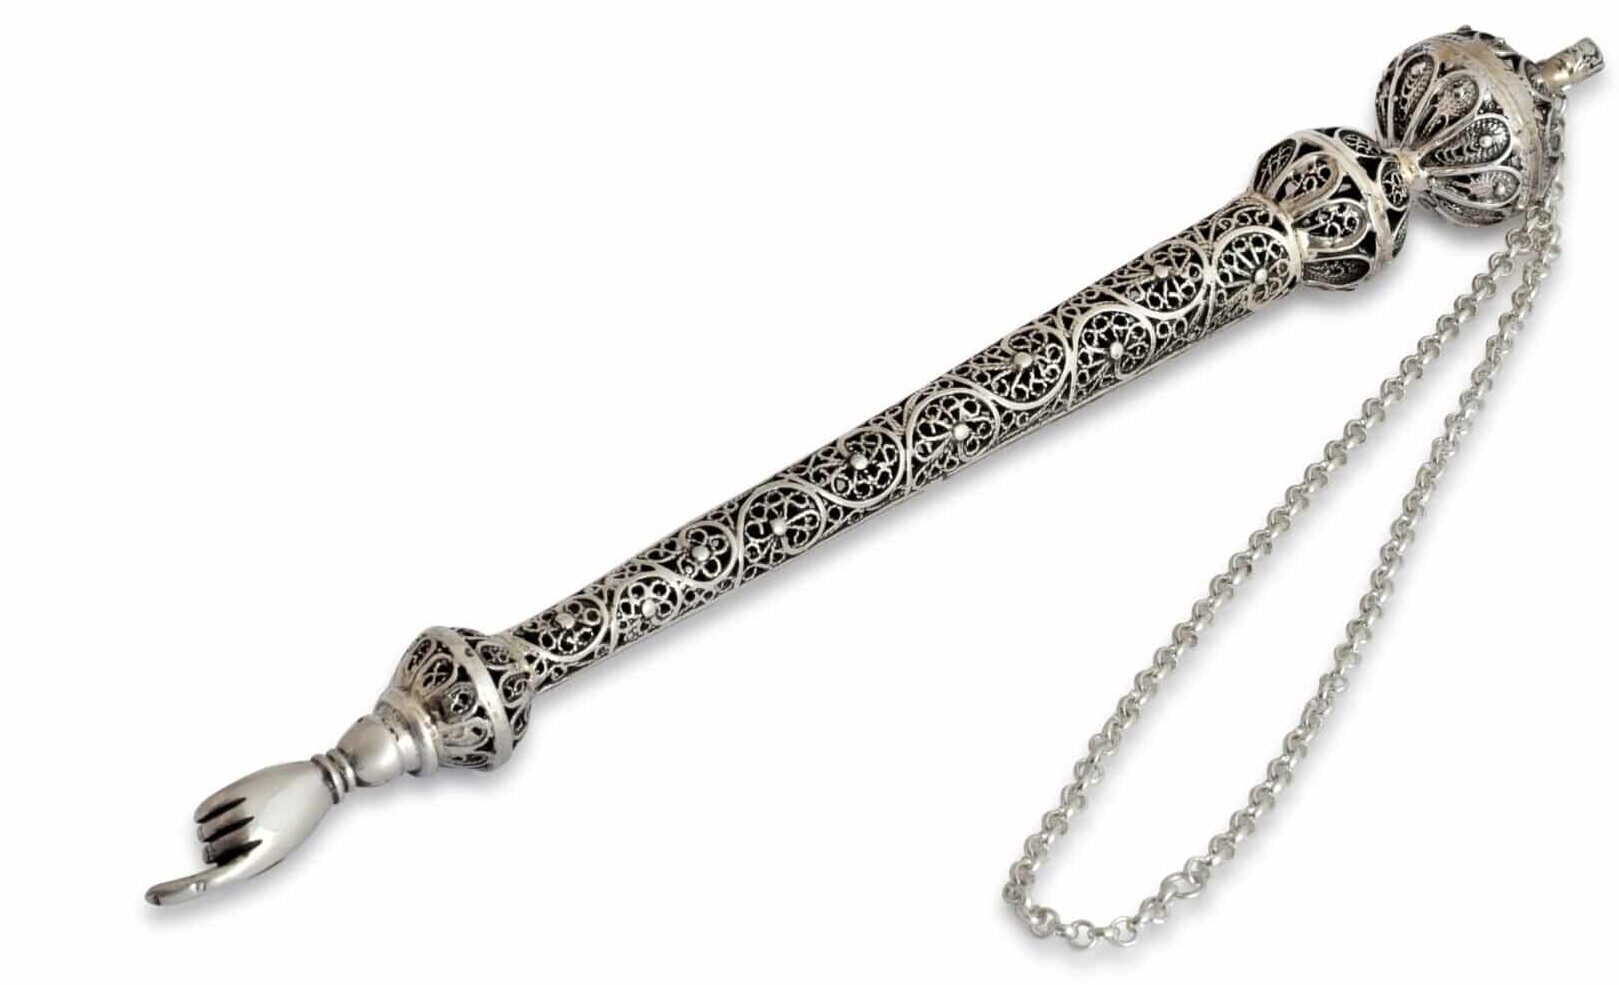 Royal Style Silver Torah Pointer with Cut Out Filigree Balls